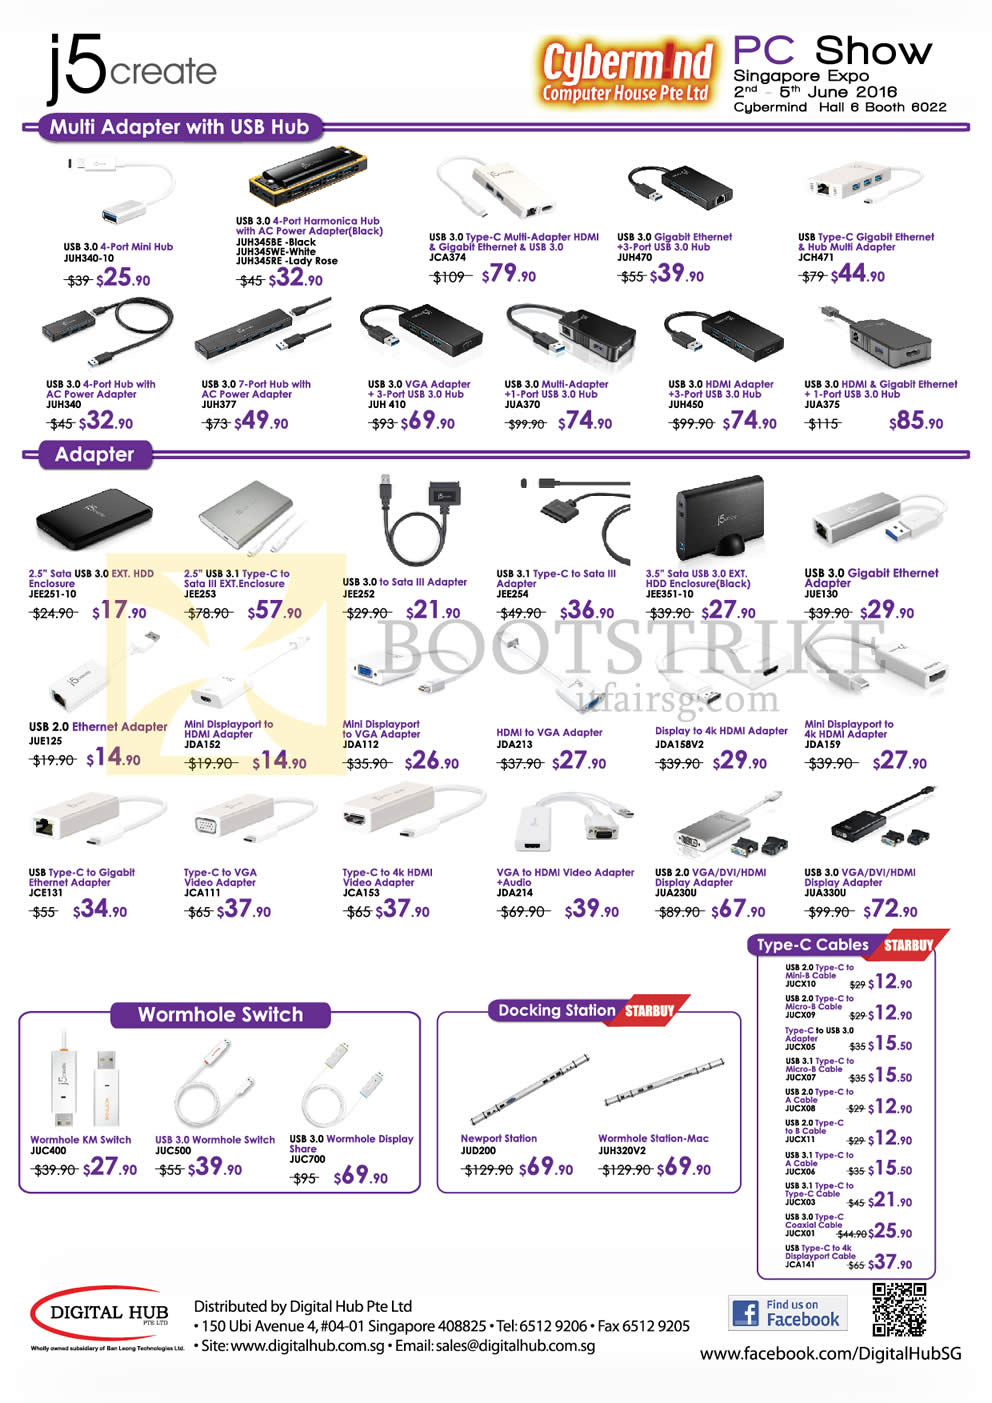 PC SHOW 2016 price list image brochure of Cybermind J5 Create Accessories, Adapters, USB Hub, Wormhole Switch, Docking Station, Type-C Cables